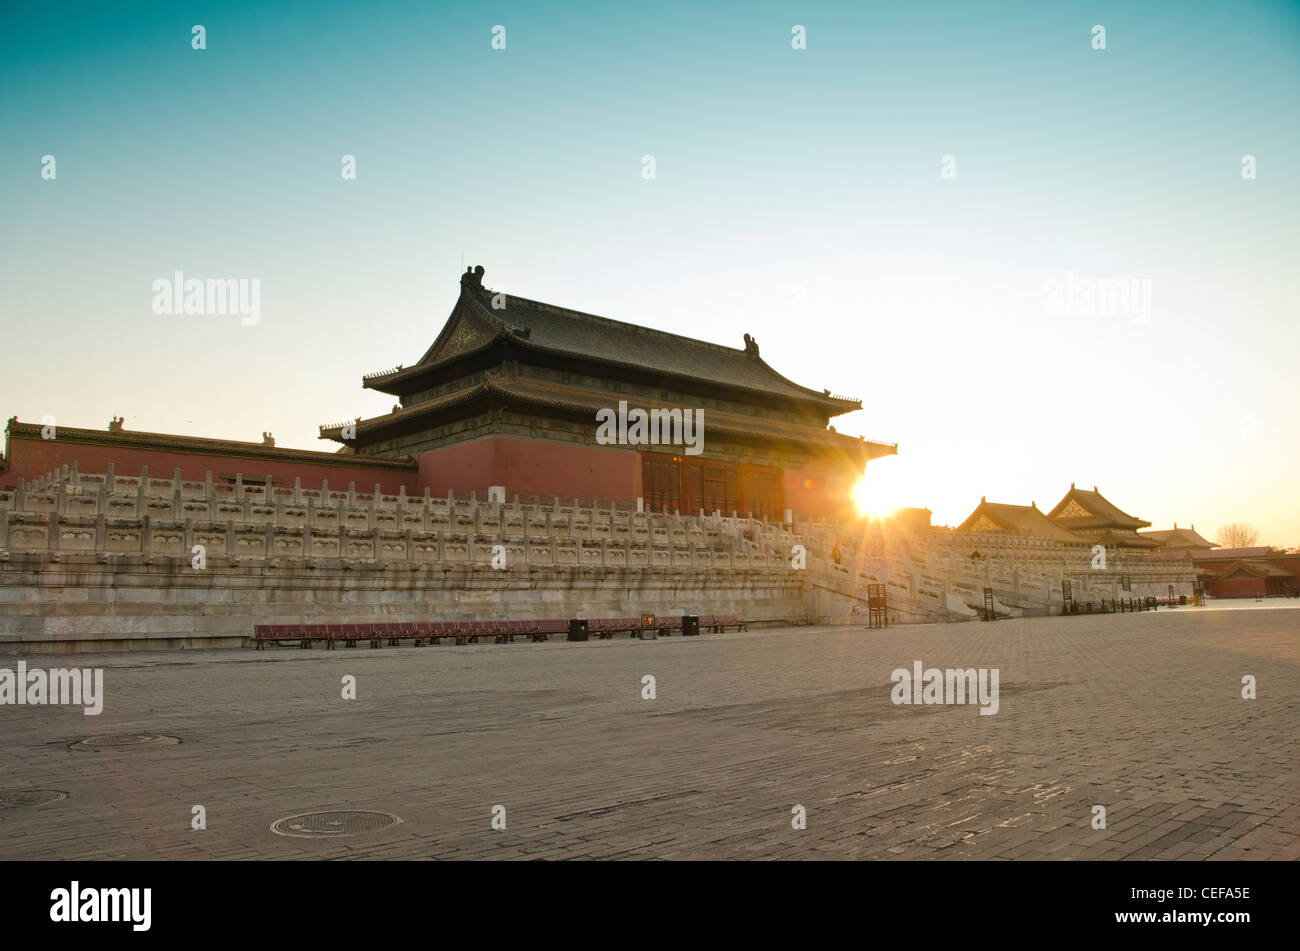 The Forbidden City (Palace Museum) in Beijing, China Stock Photo